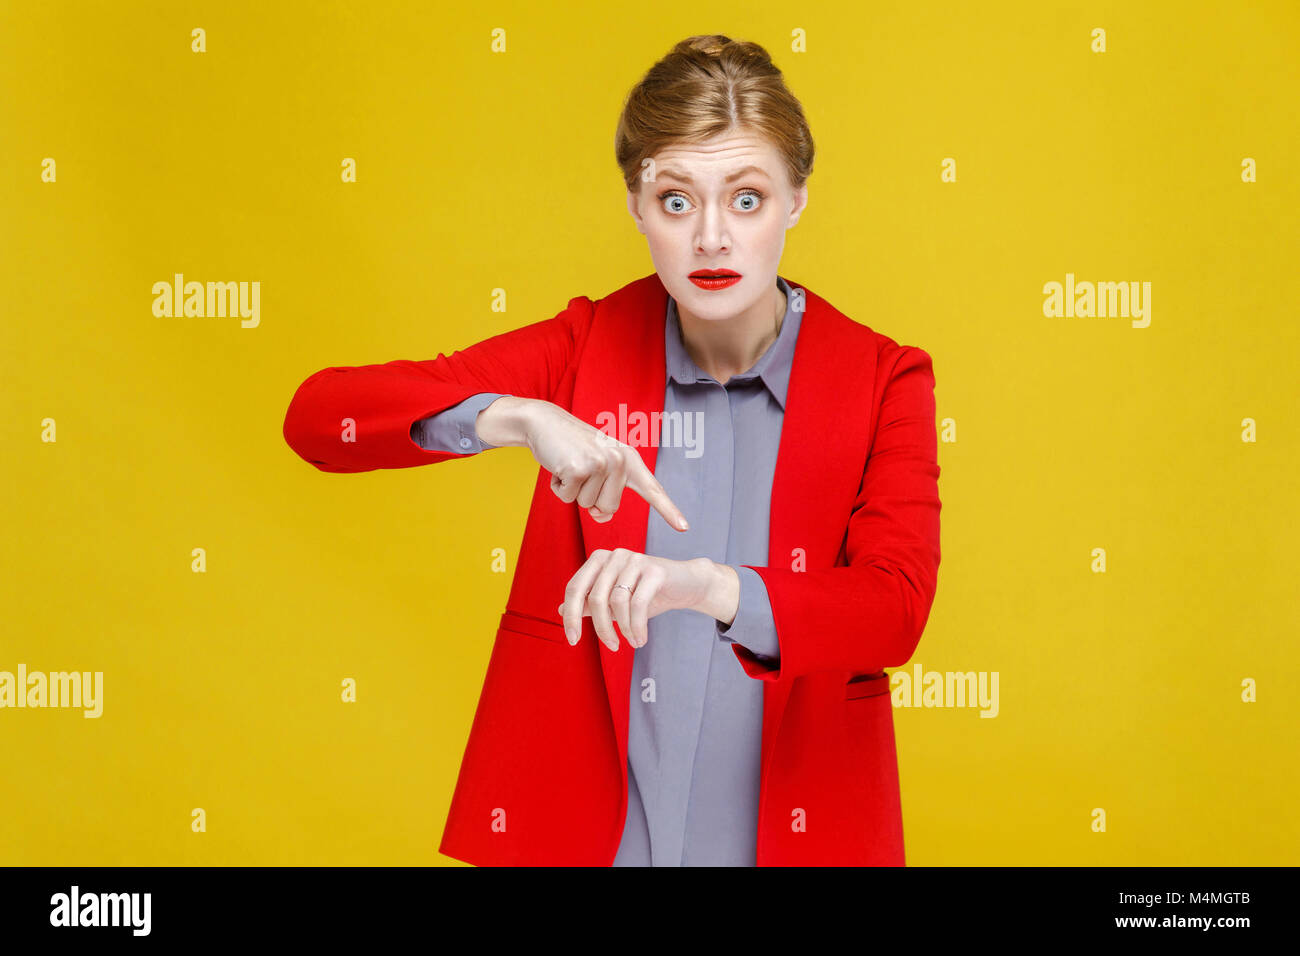 No time! Ginger red head woman in red suit showing at watch. Studio shot, isolated on yellow background Stock Photo